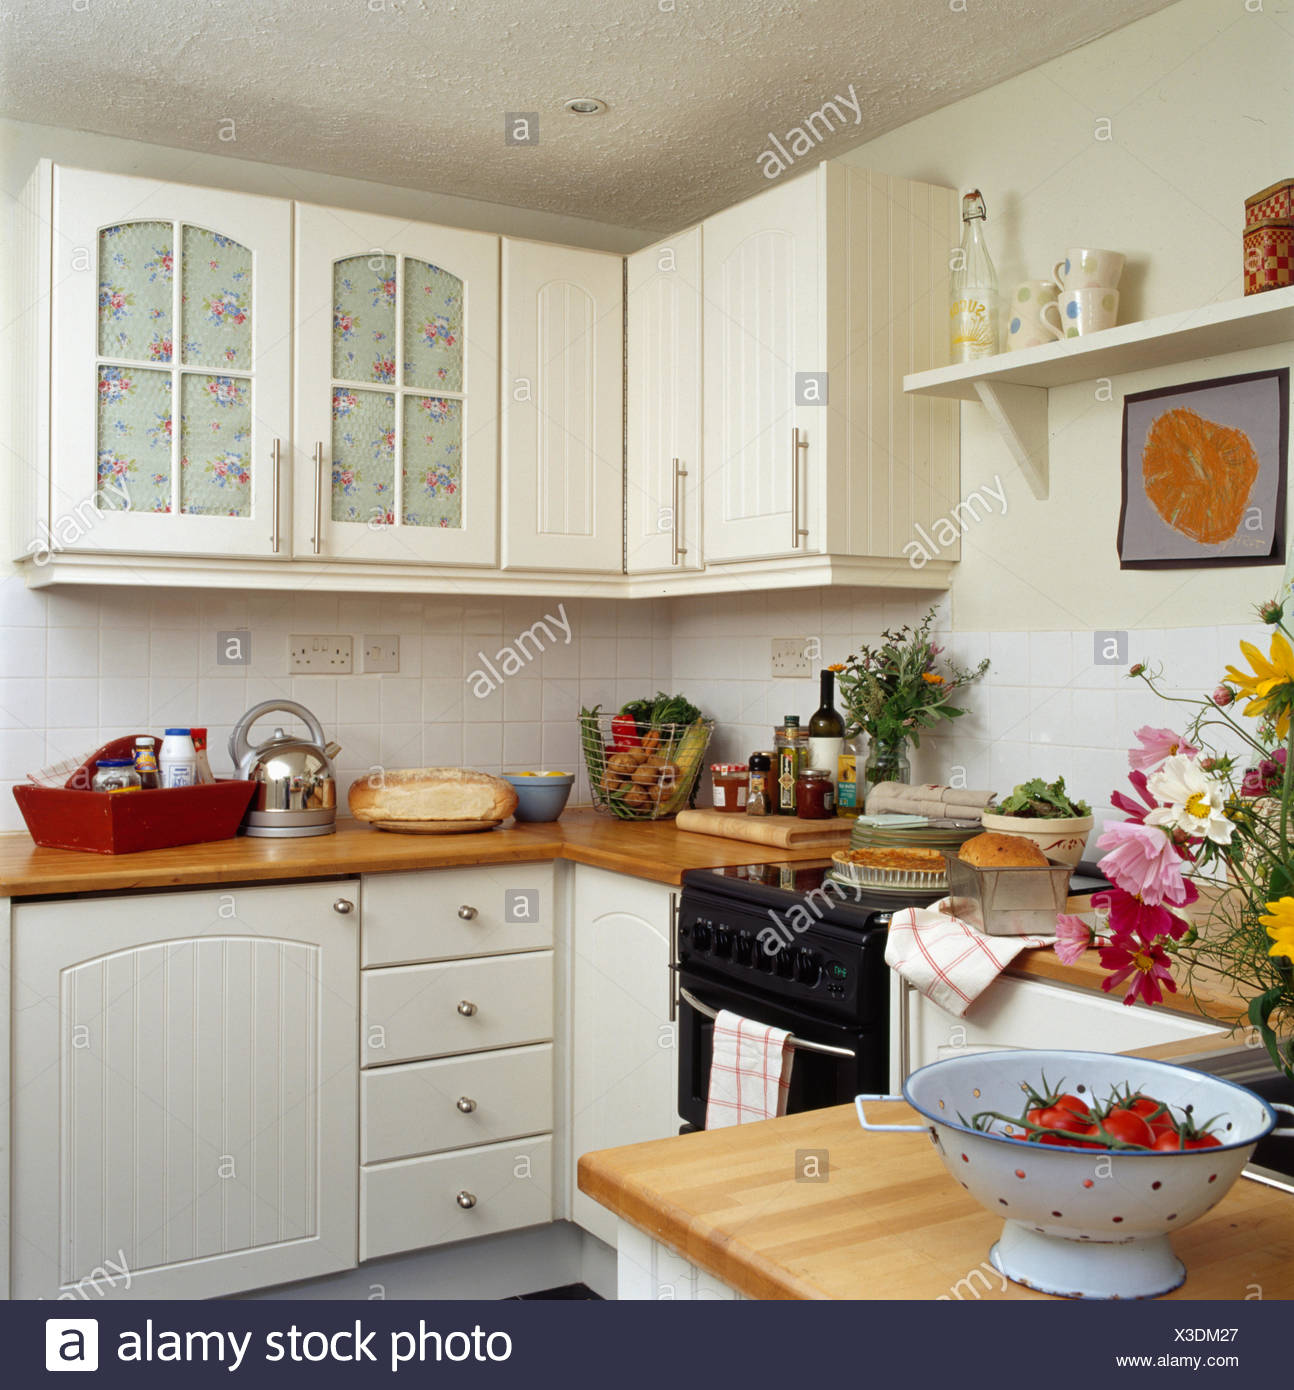 Cream Fitted Units In Country Stock Photos Cream Fitted Units In